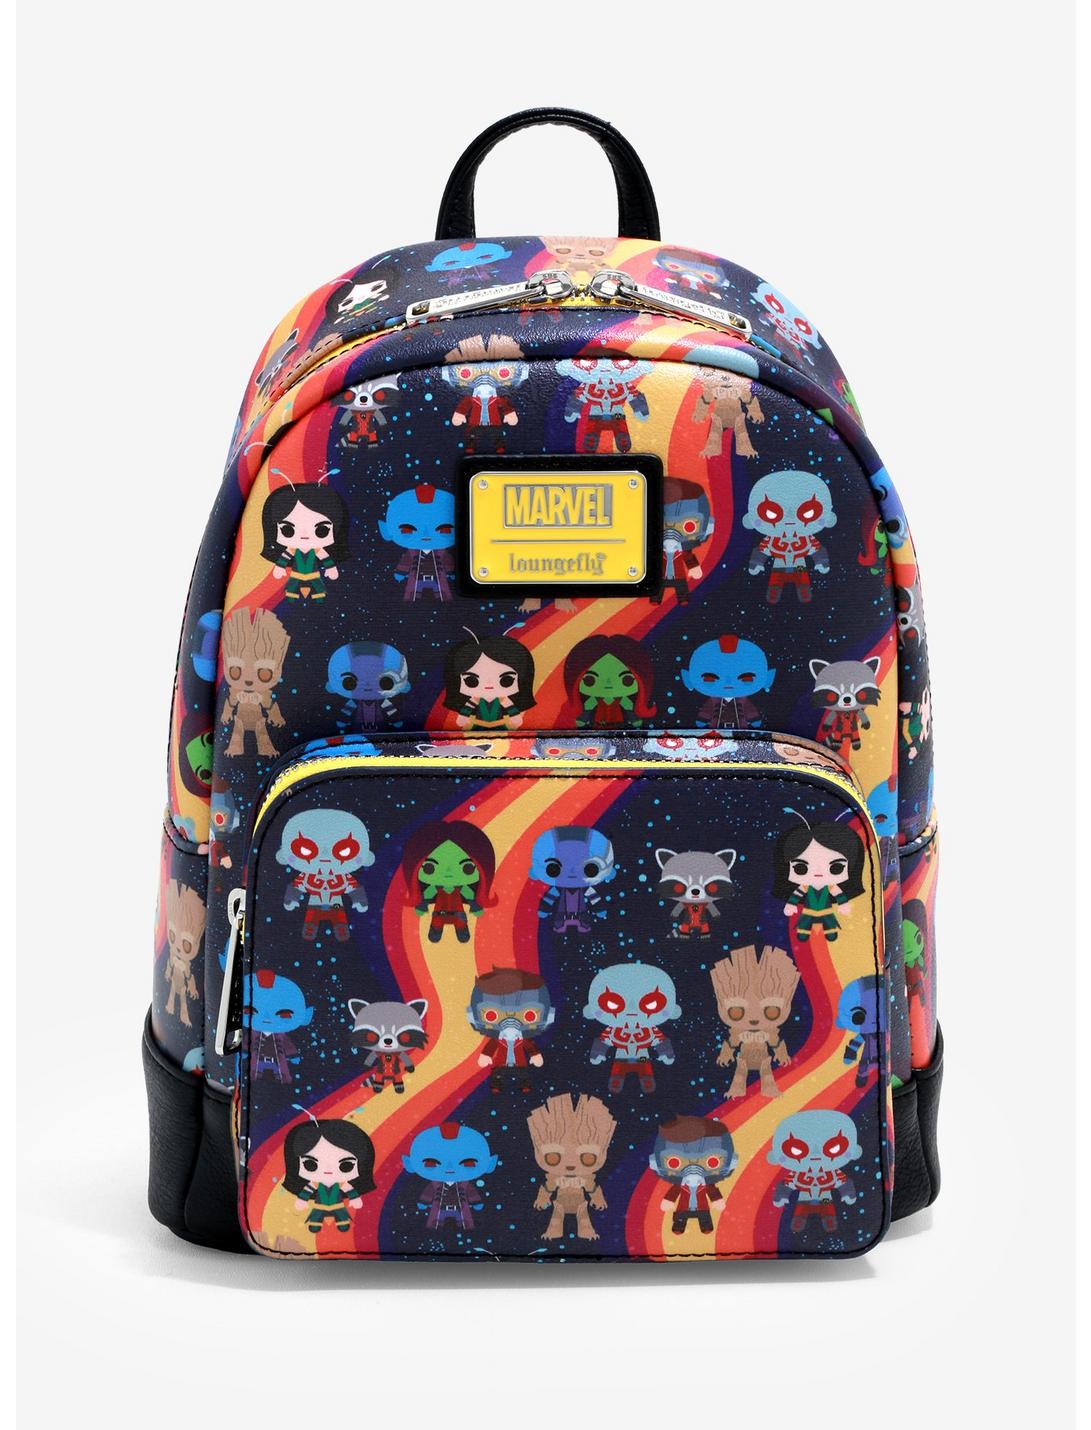 Official Loungefly Marvel Guardians Of The Galaxy Kawaii Mini Back Pack Bag